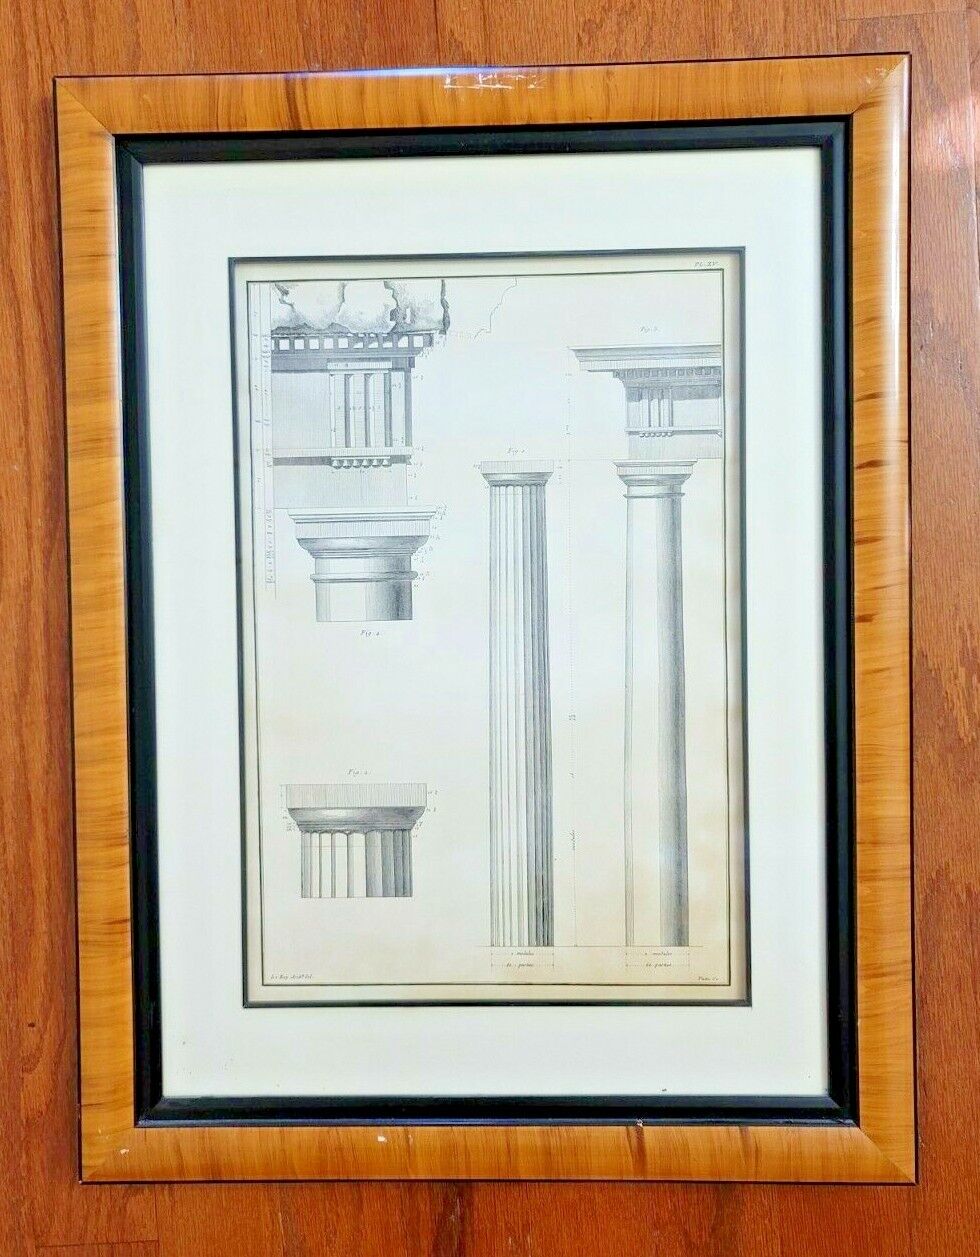 THE PALATINO COLLECTION LITHOGRAPH PRINT – ARCHITECTURAL– GREEK COLUMN BLUEPRINT